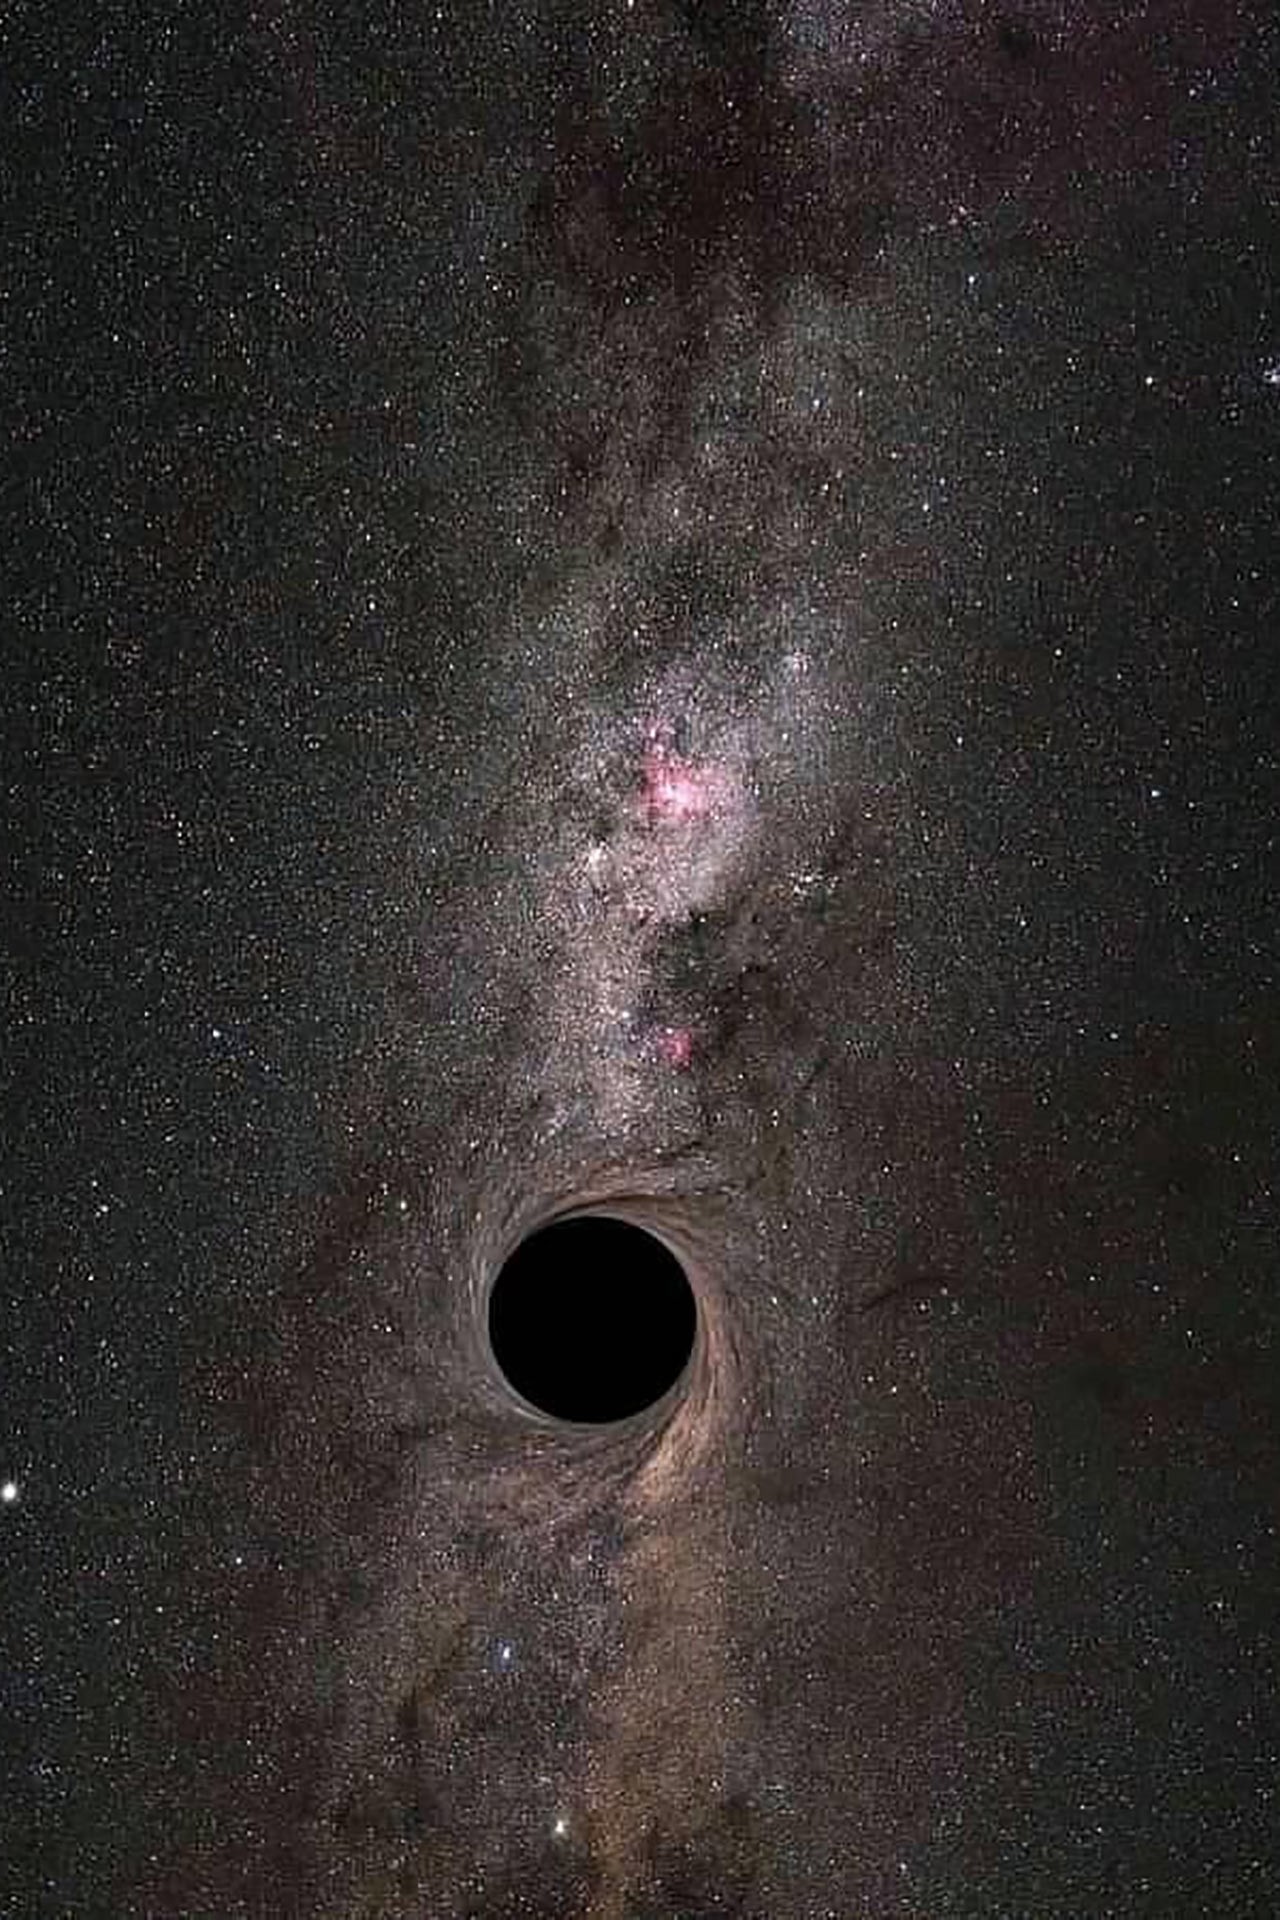 BLACK HOLE IN THE SKY